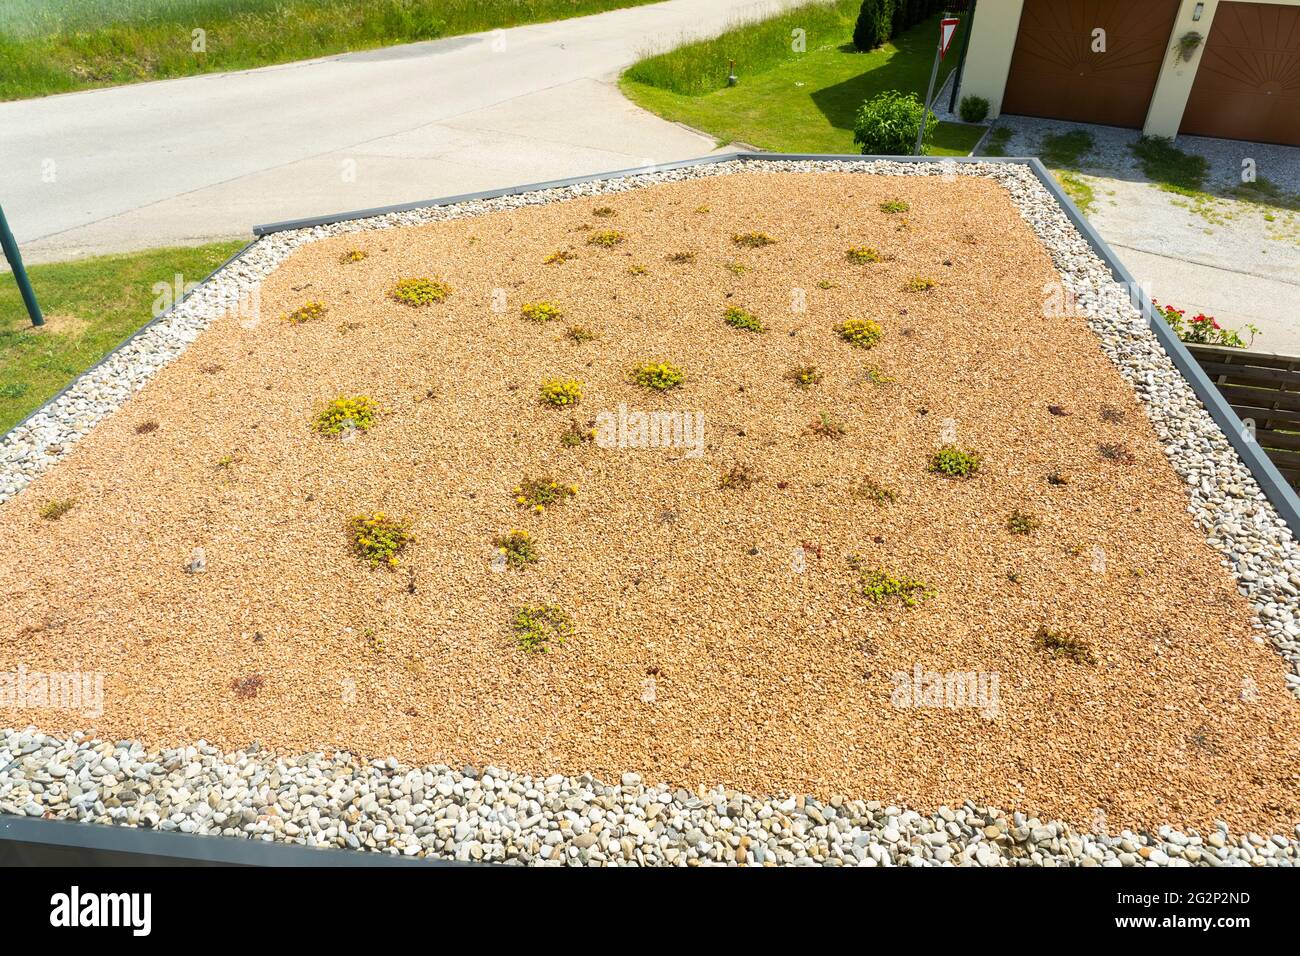 A green roof on a building used for rainwater capture to use for flushing toilets within a house. Lower Austria, Austria Stock Photo